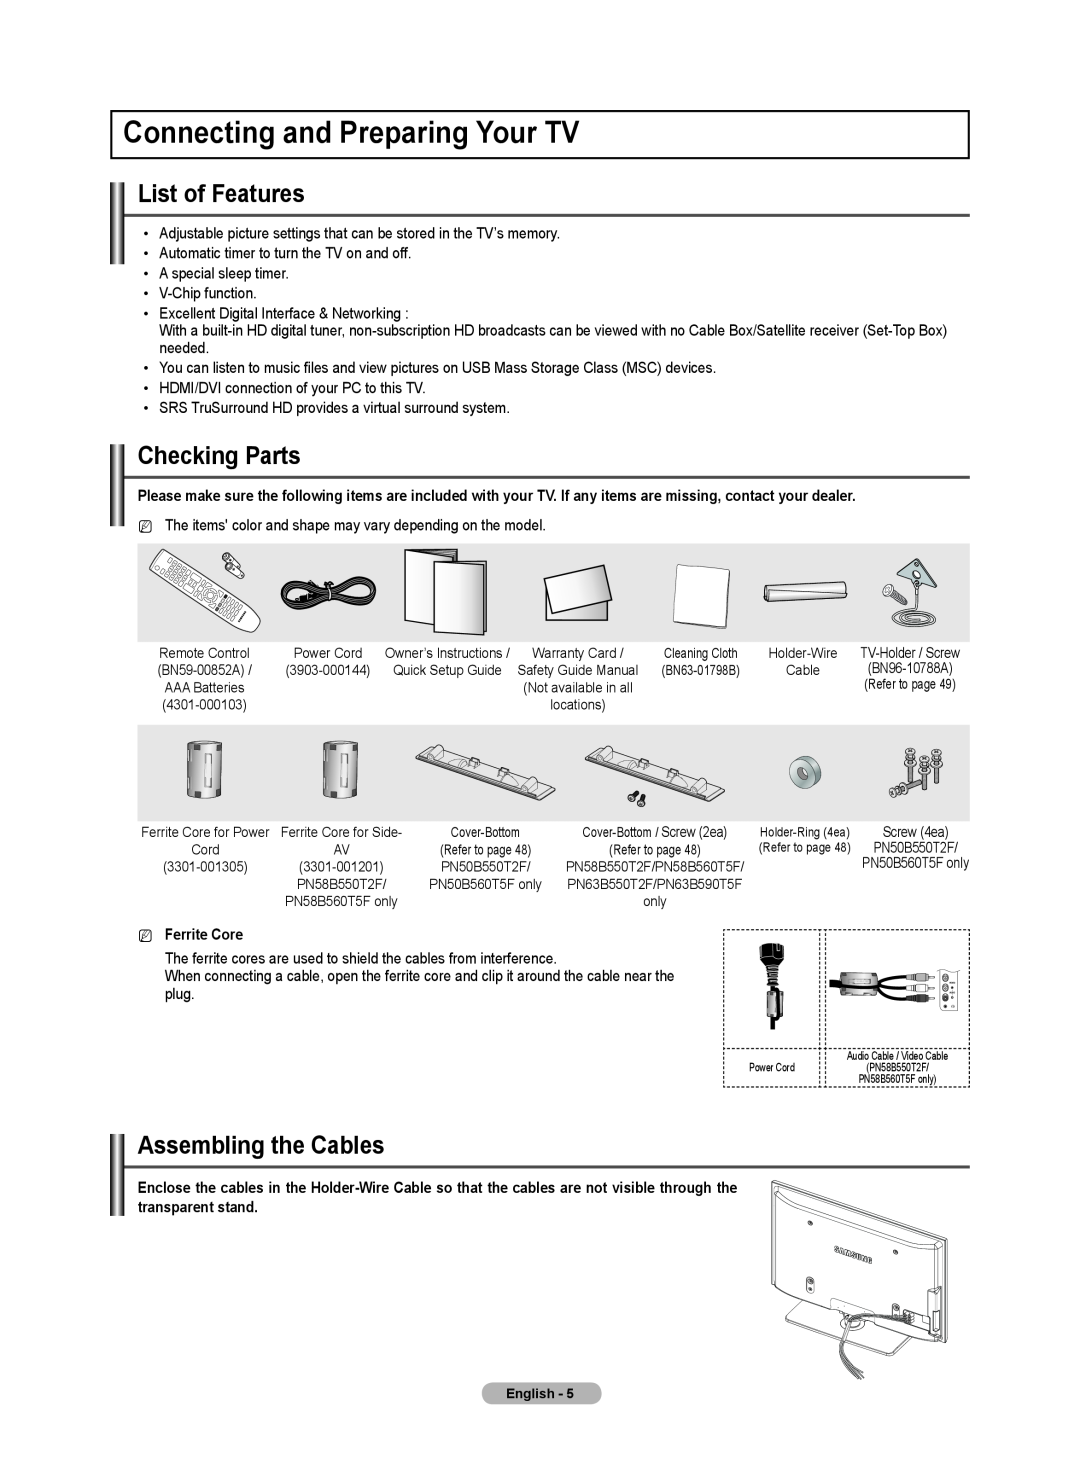 Samsung PN58B550TF, PN50B550TF Connecting and Preparing Your TV, List of Features, Checking Parts, Assembling the Cables 